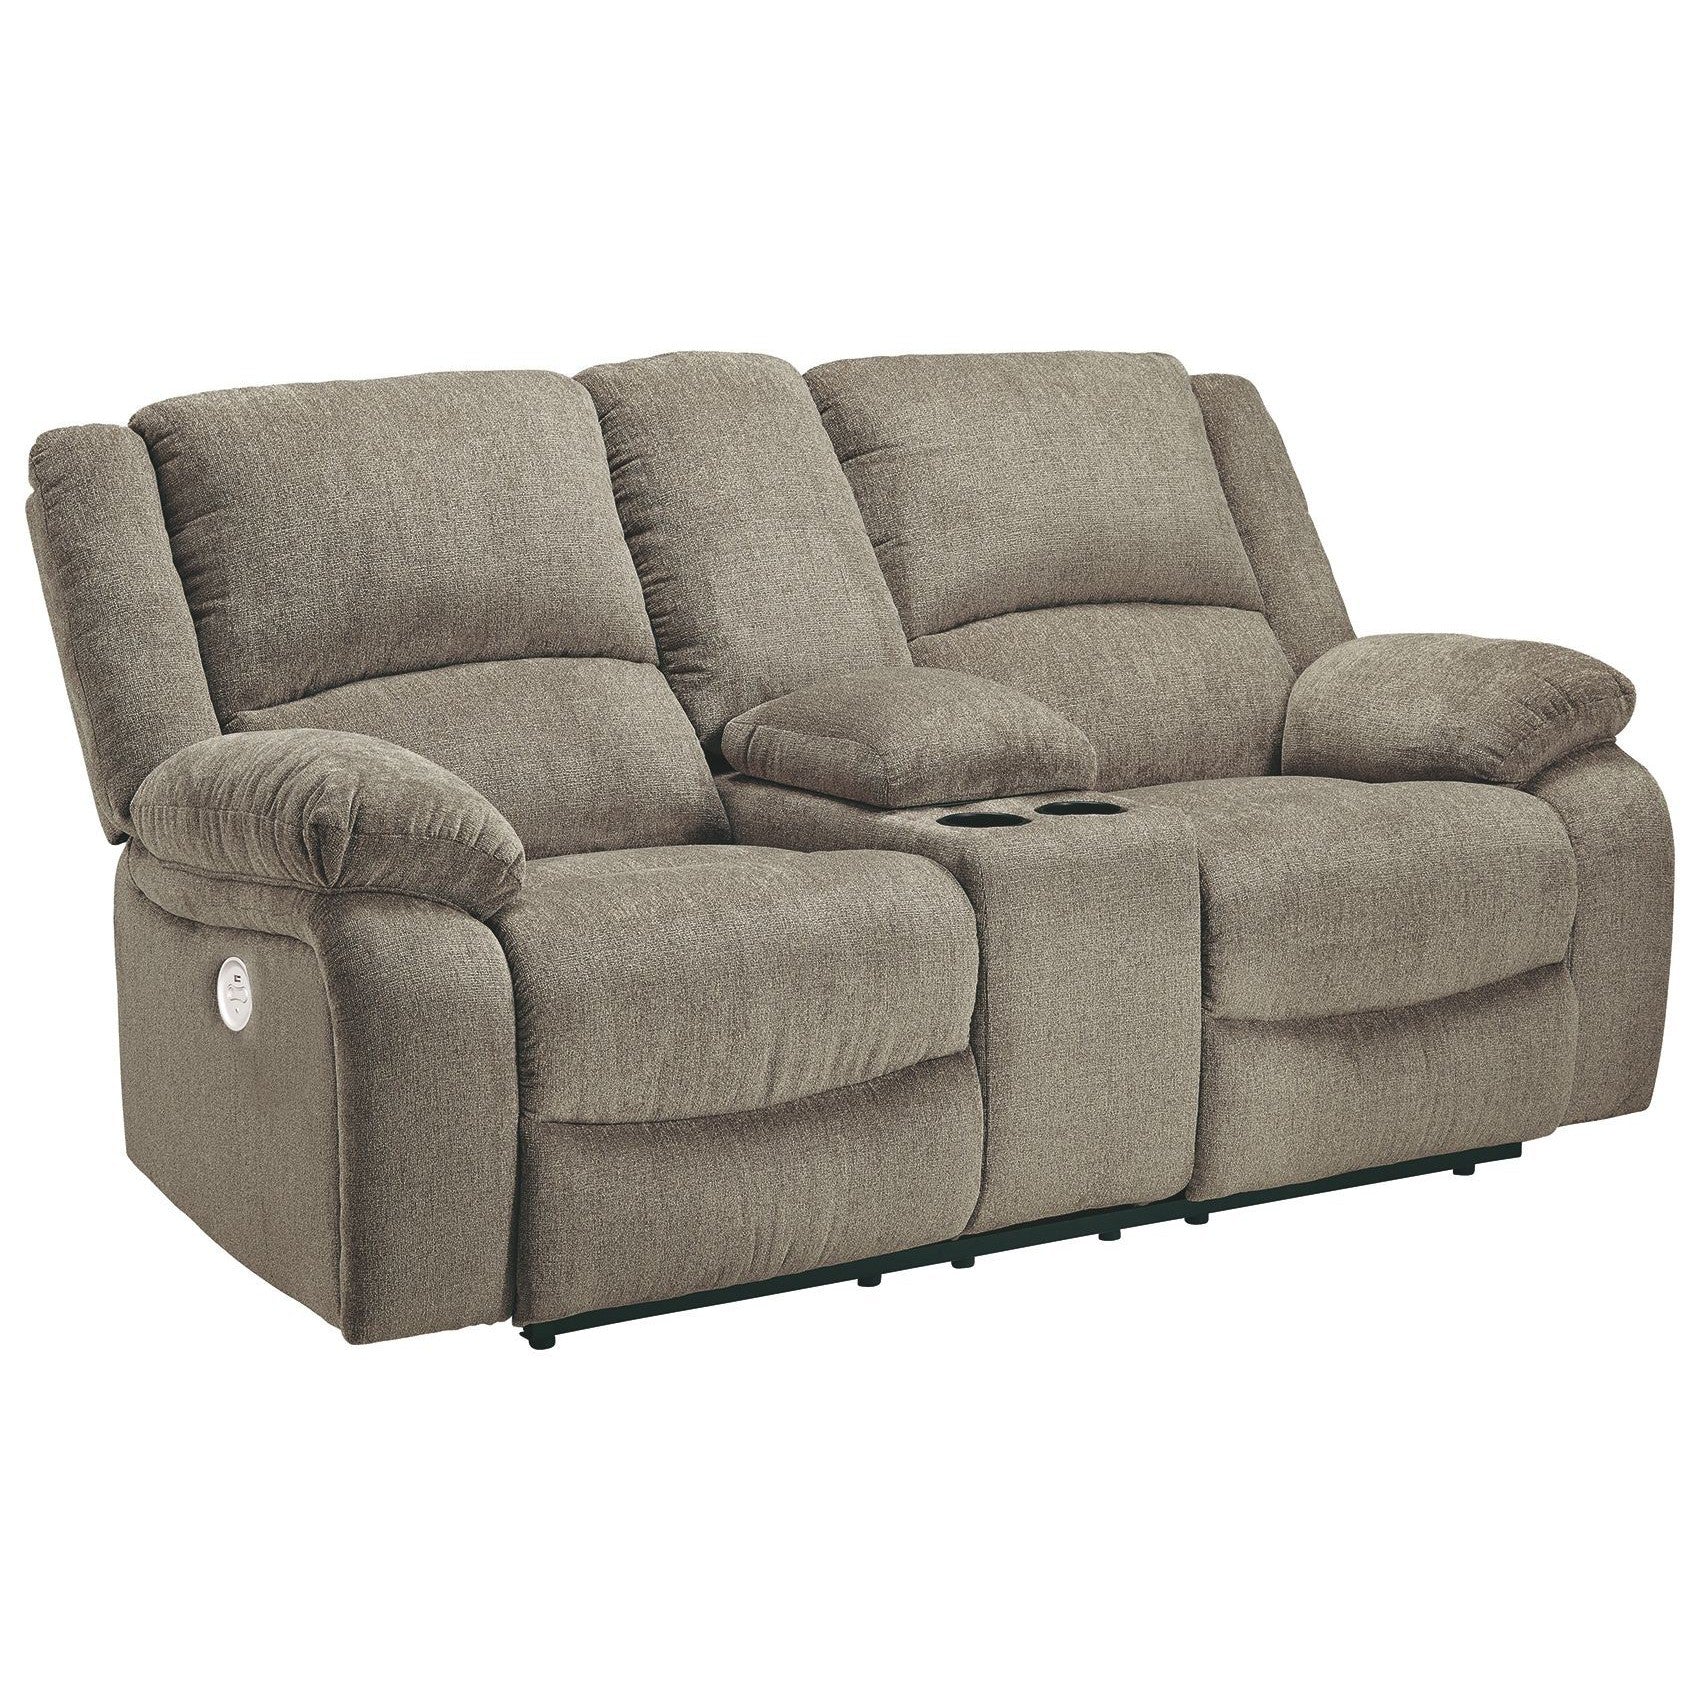 Draycoll - Pewter - Dbl Rec Pwr Loveseat W/console